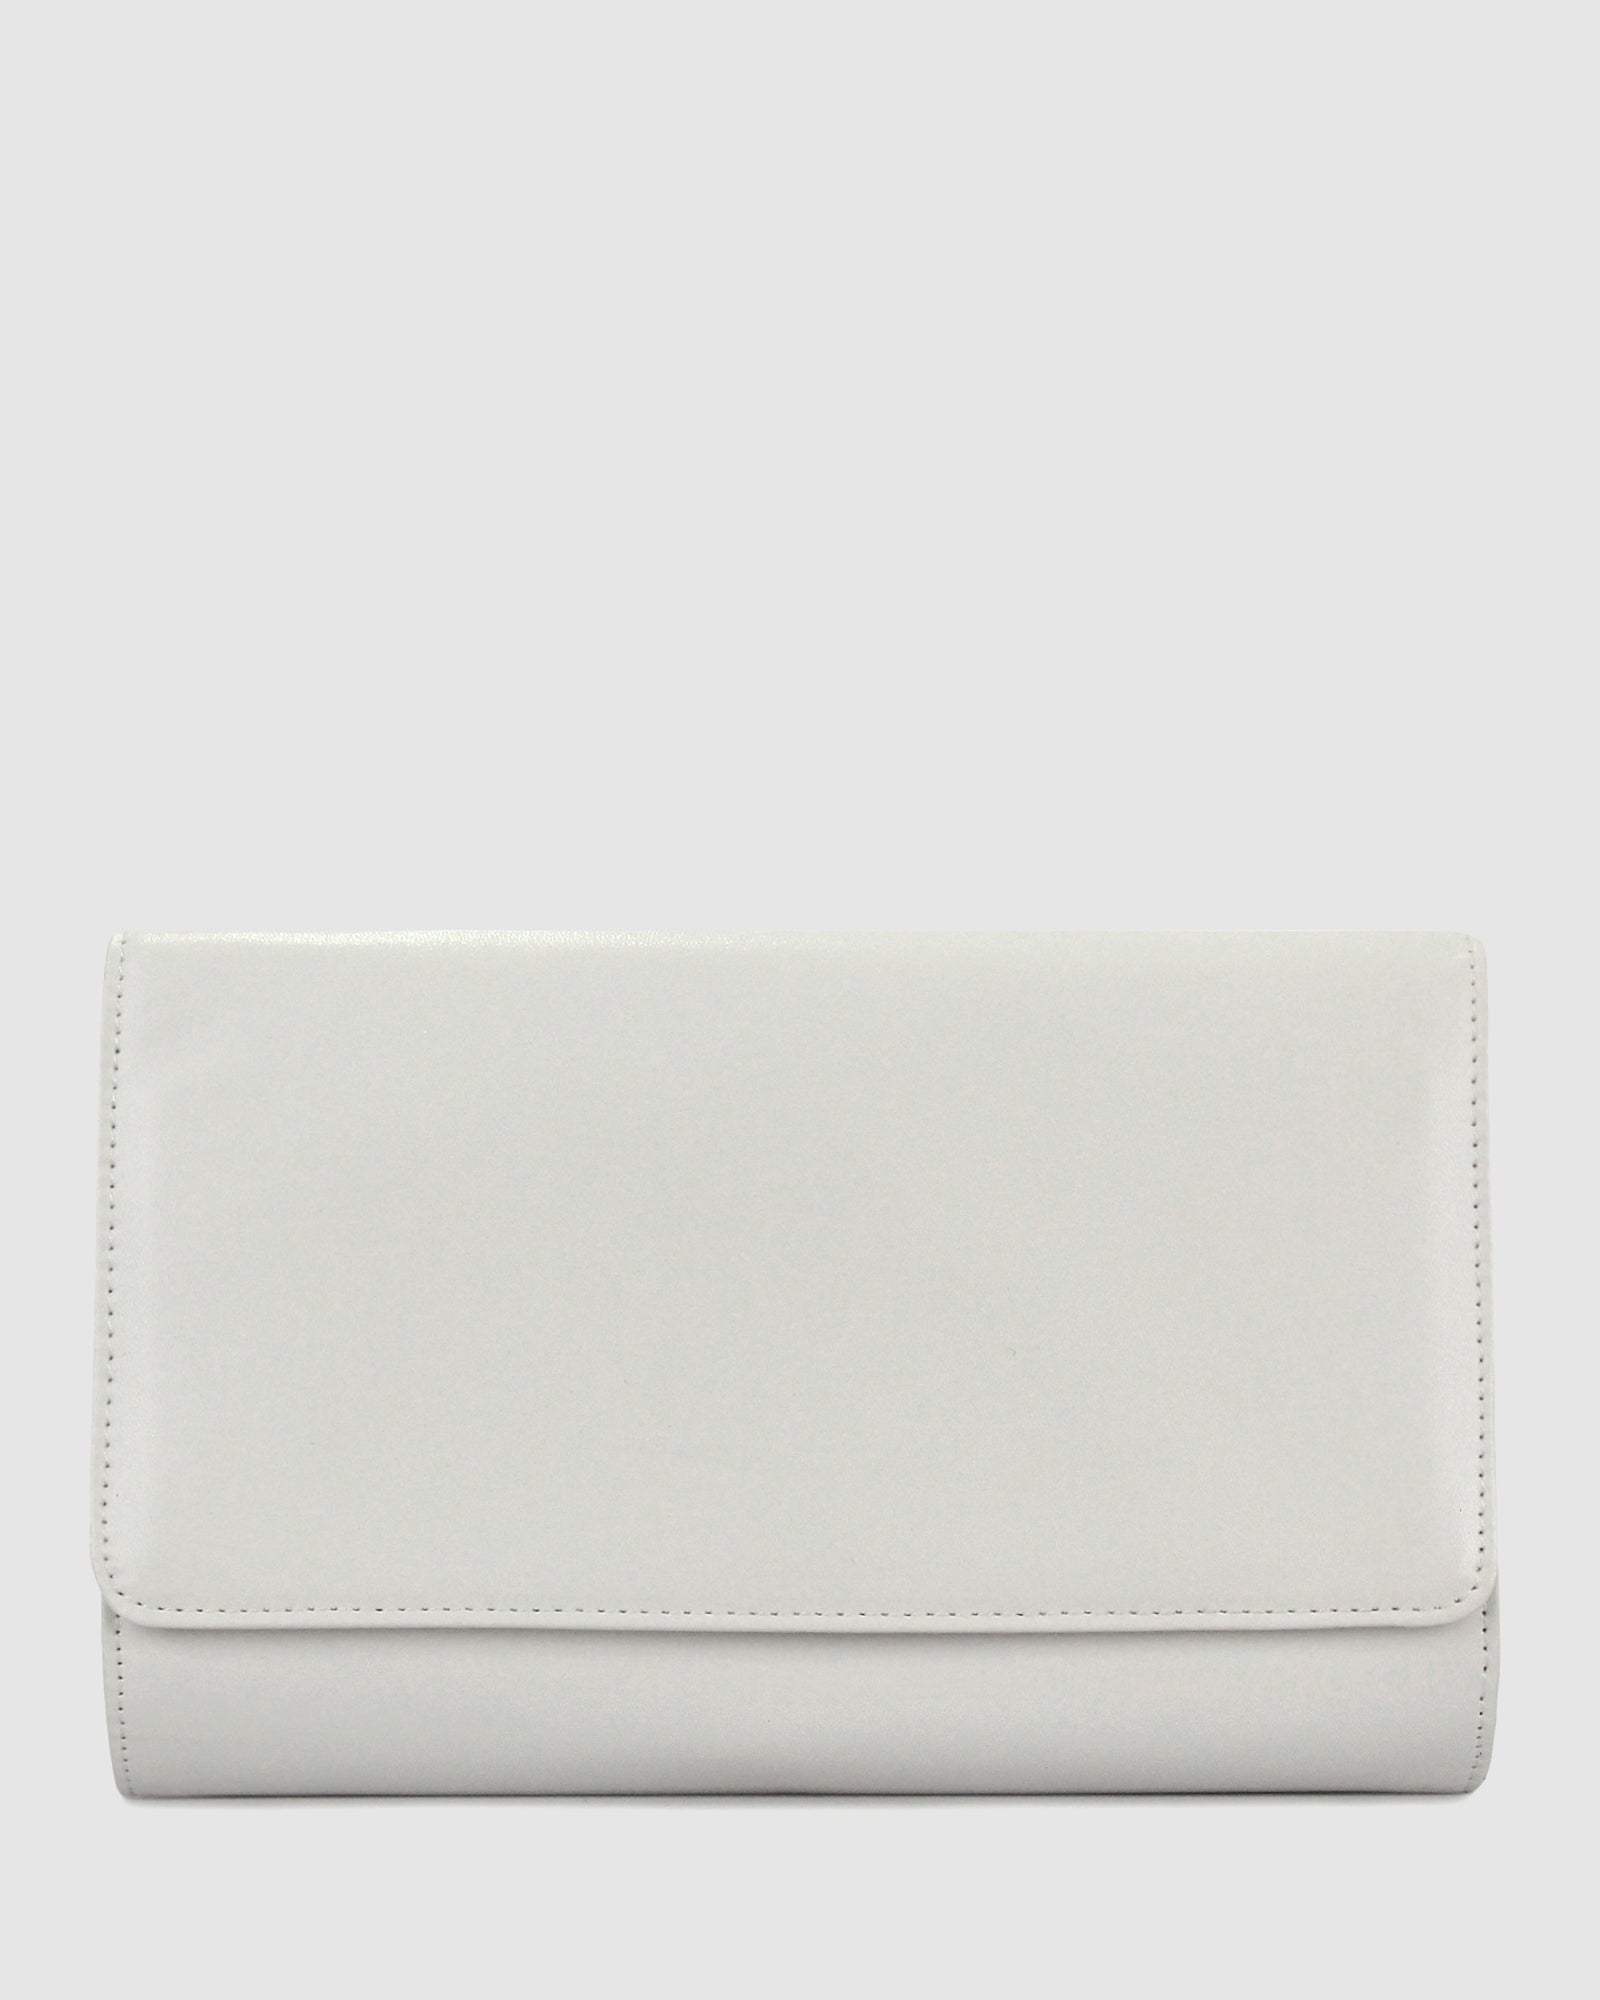 Buy Betts ARCHIE Clutch Bag by Betts online - Betts